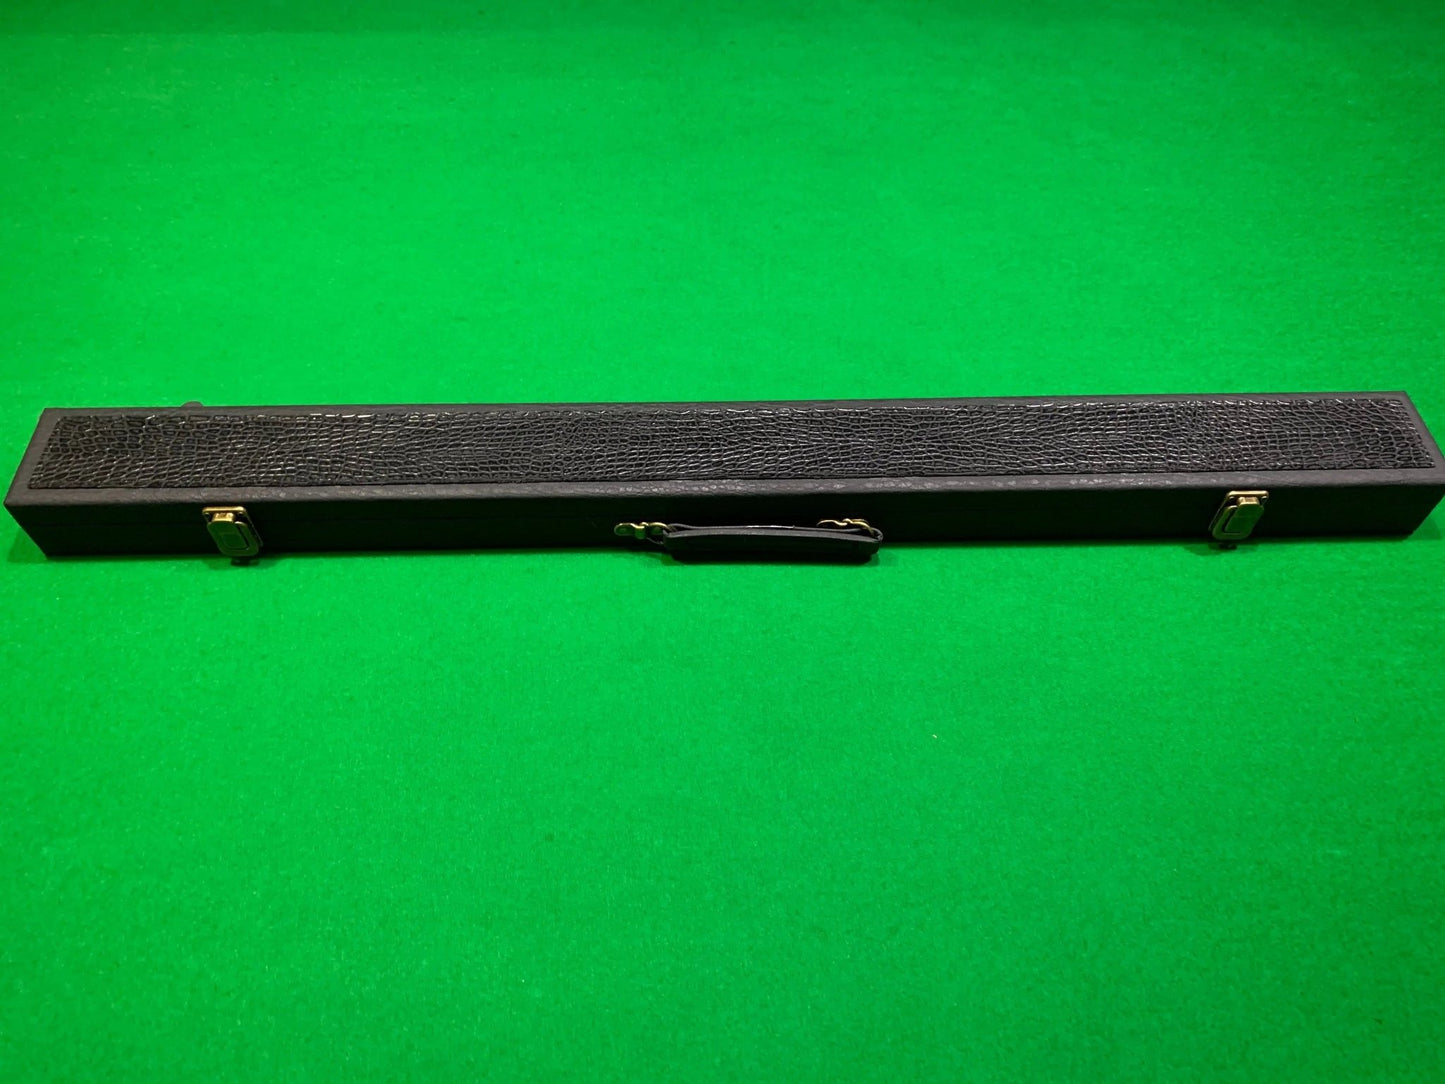 Black 1/2 Pce Simulated Leather Pool, Snooker & Billiard Cue Case - Q-Masters